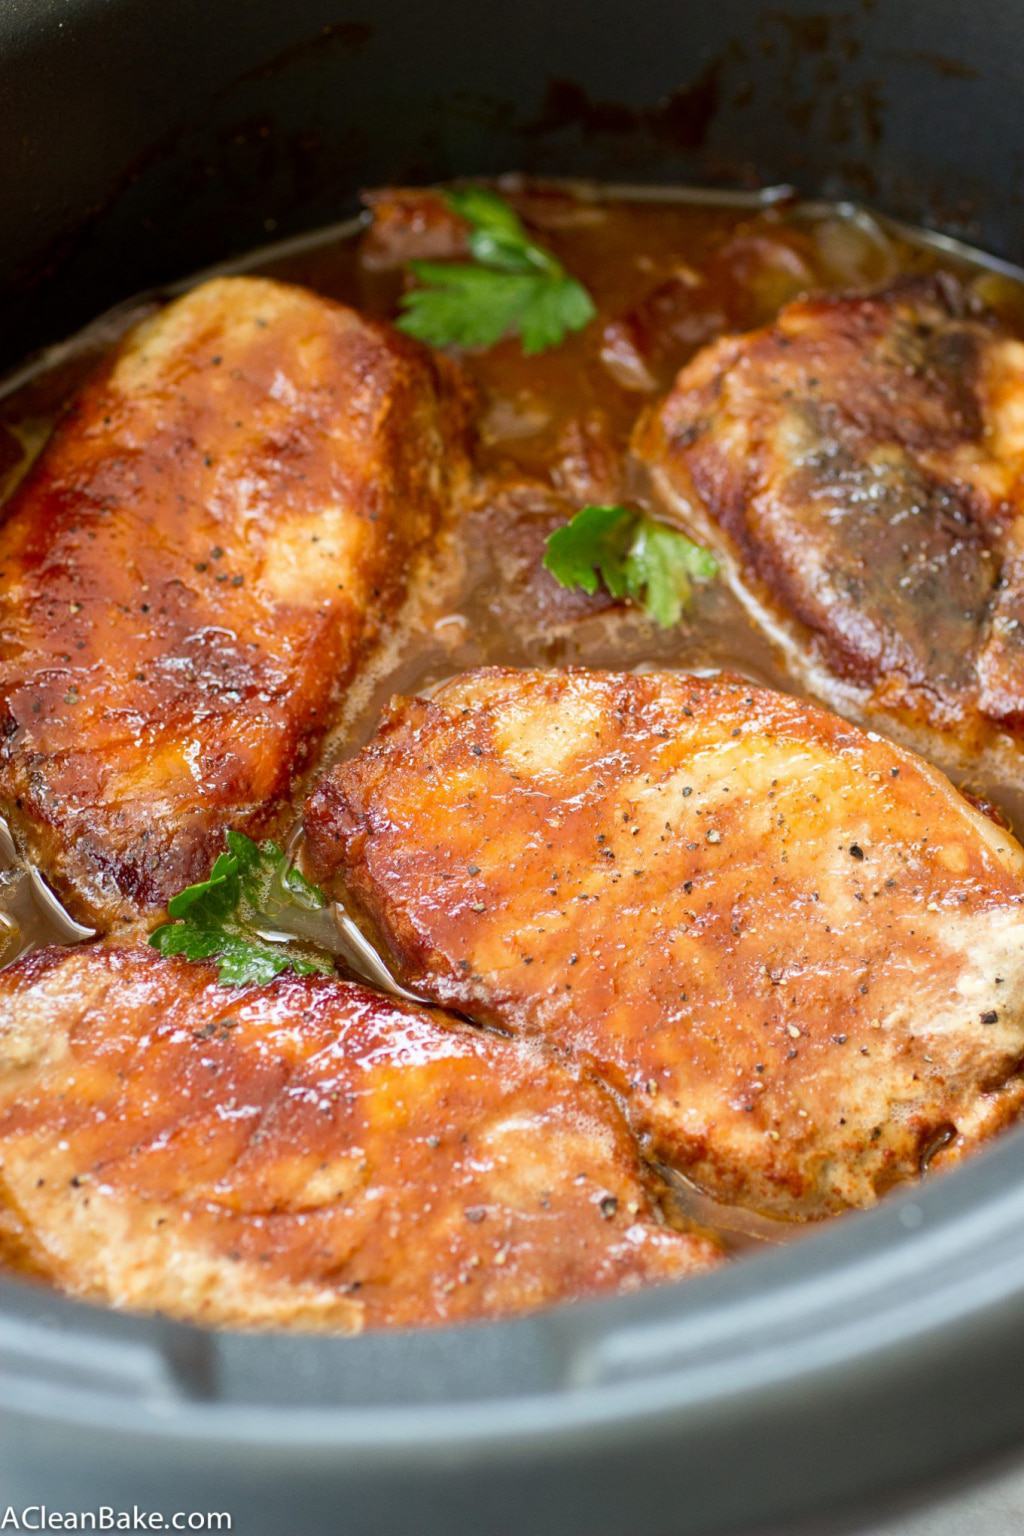 Crockpot Pork Chops With Apples And Onions Gluten Free And Paleo A Clean Bake